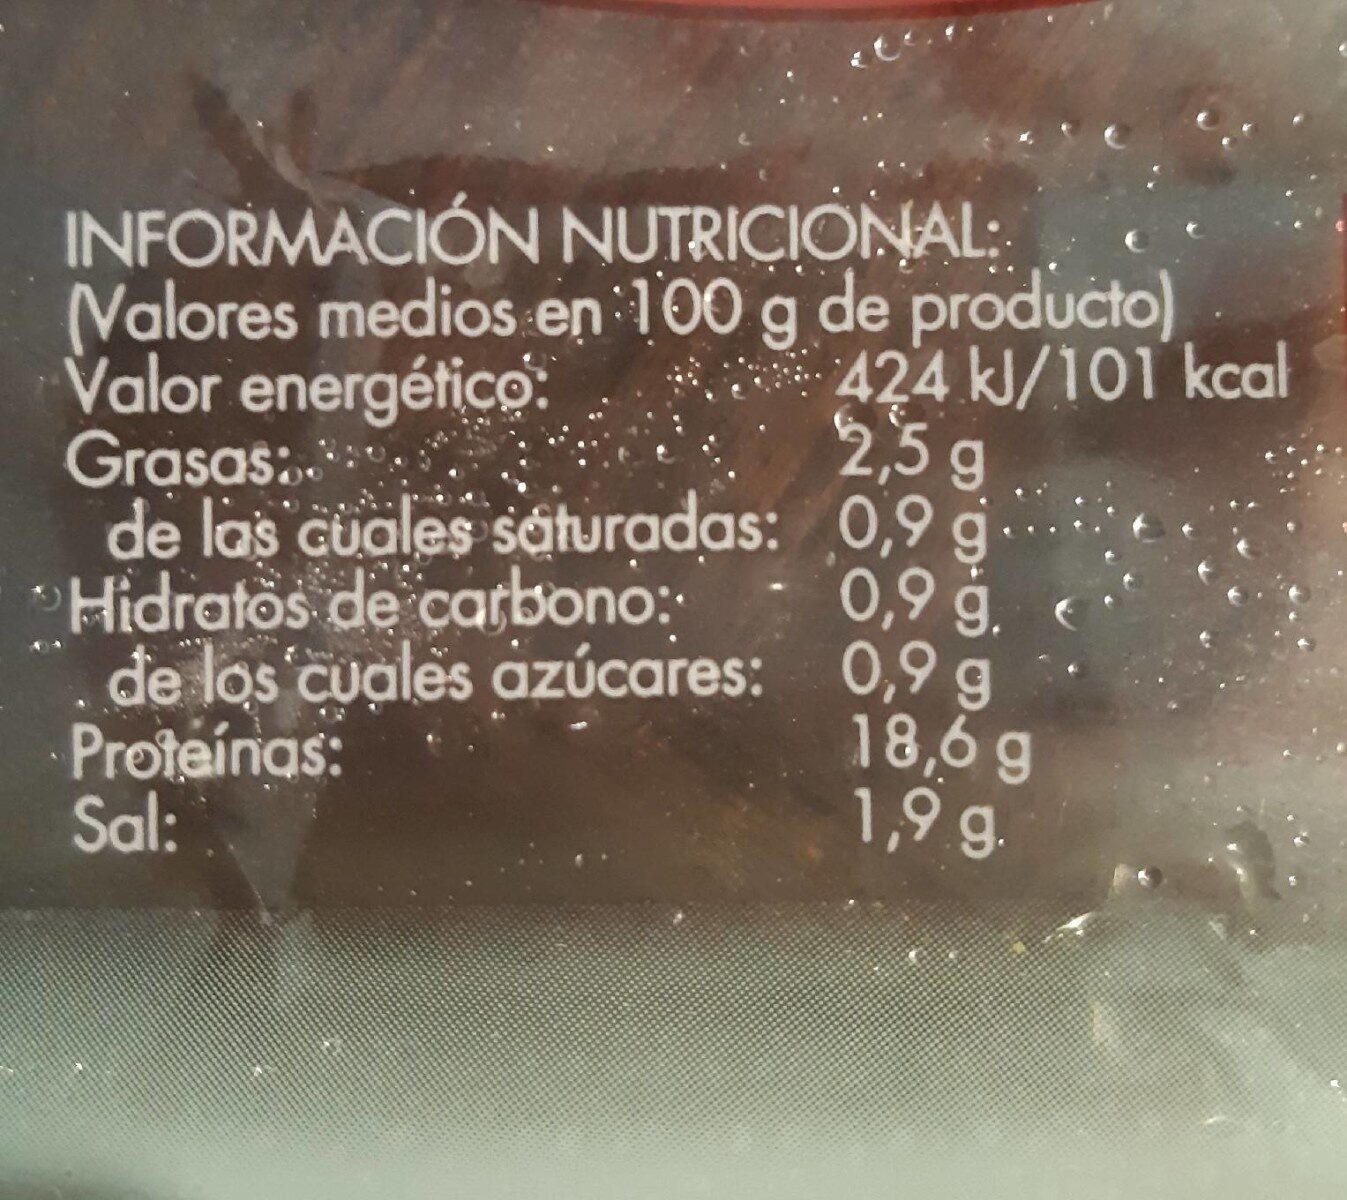 Jamón cocido extra finas lonchas - Nutrition facts - fr